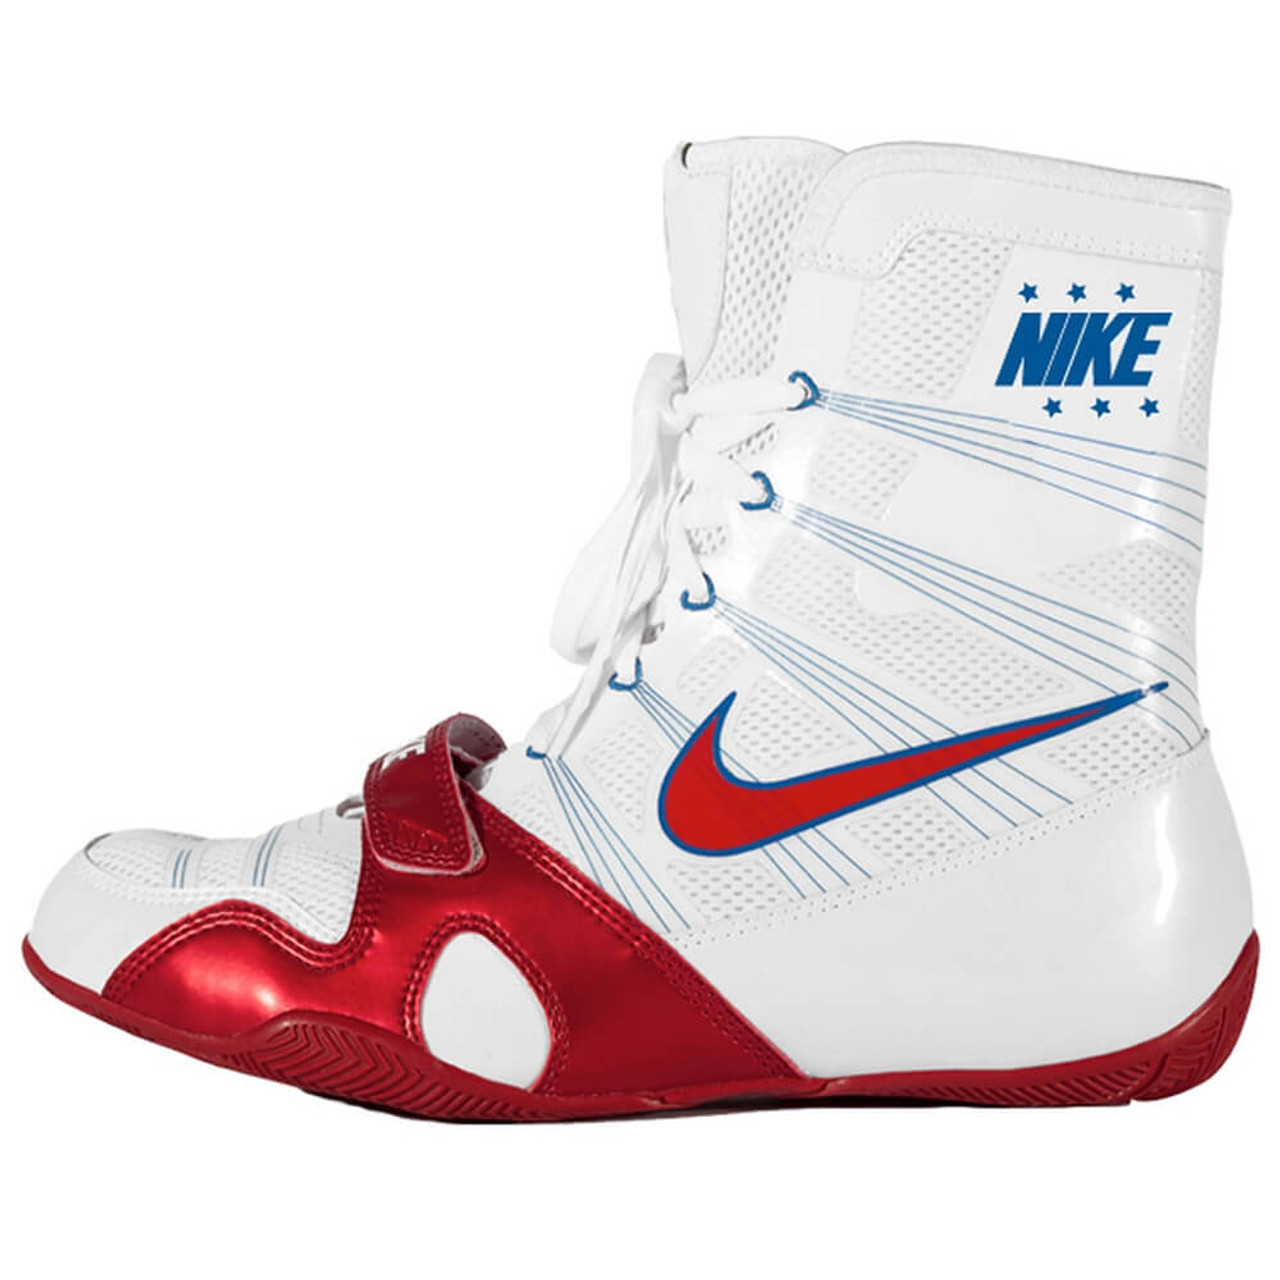 NIKE BOXING BOOTS